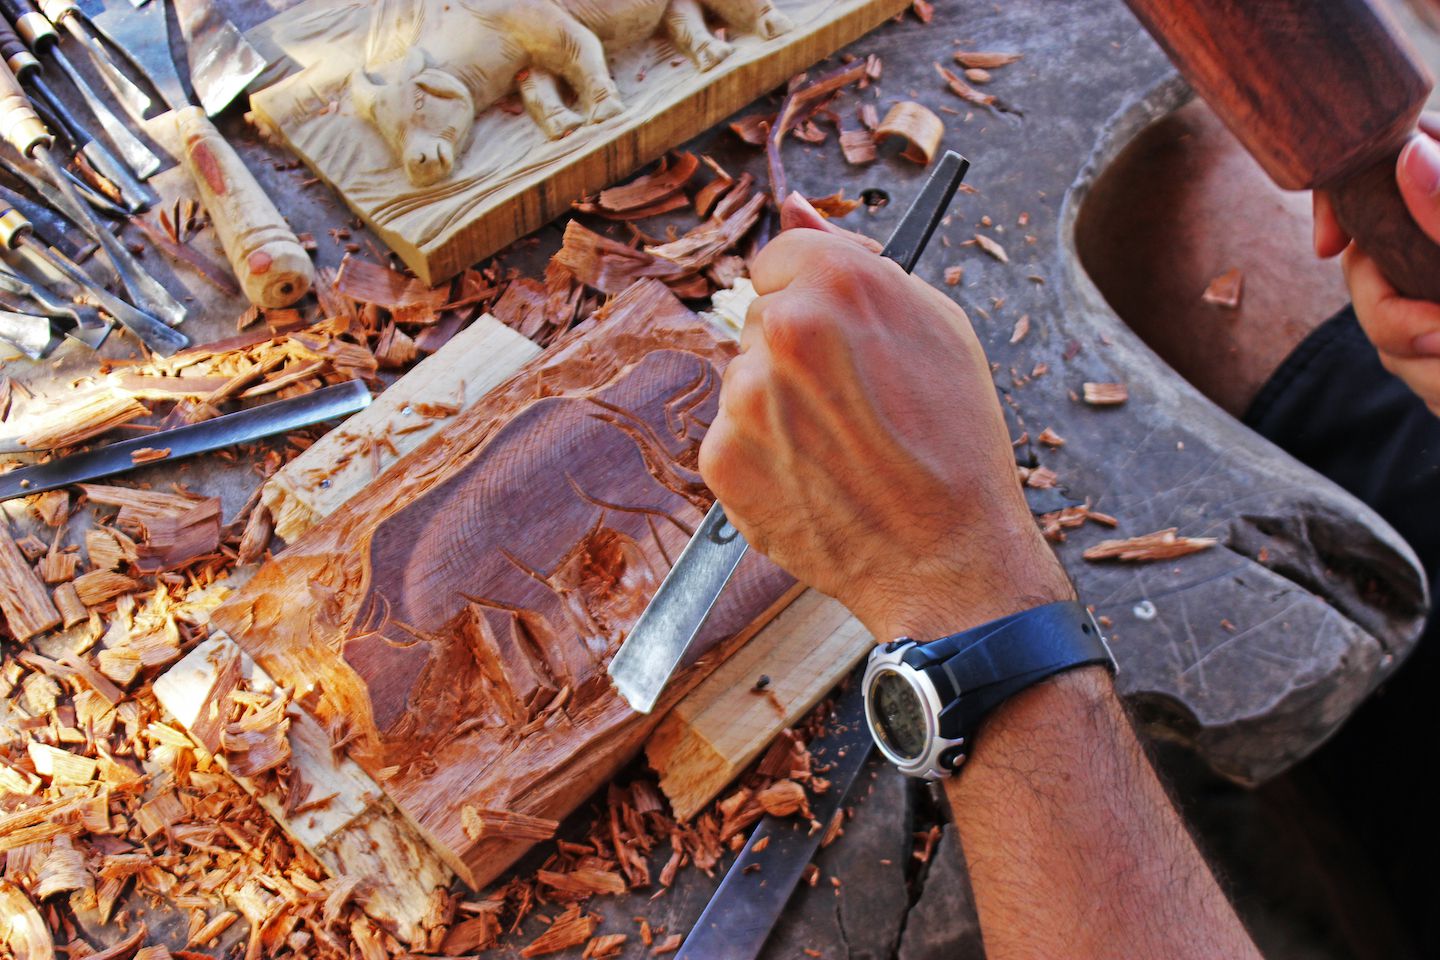 Carlos learning wood carving with the Backstreet Academy, Vientiane, Laos